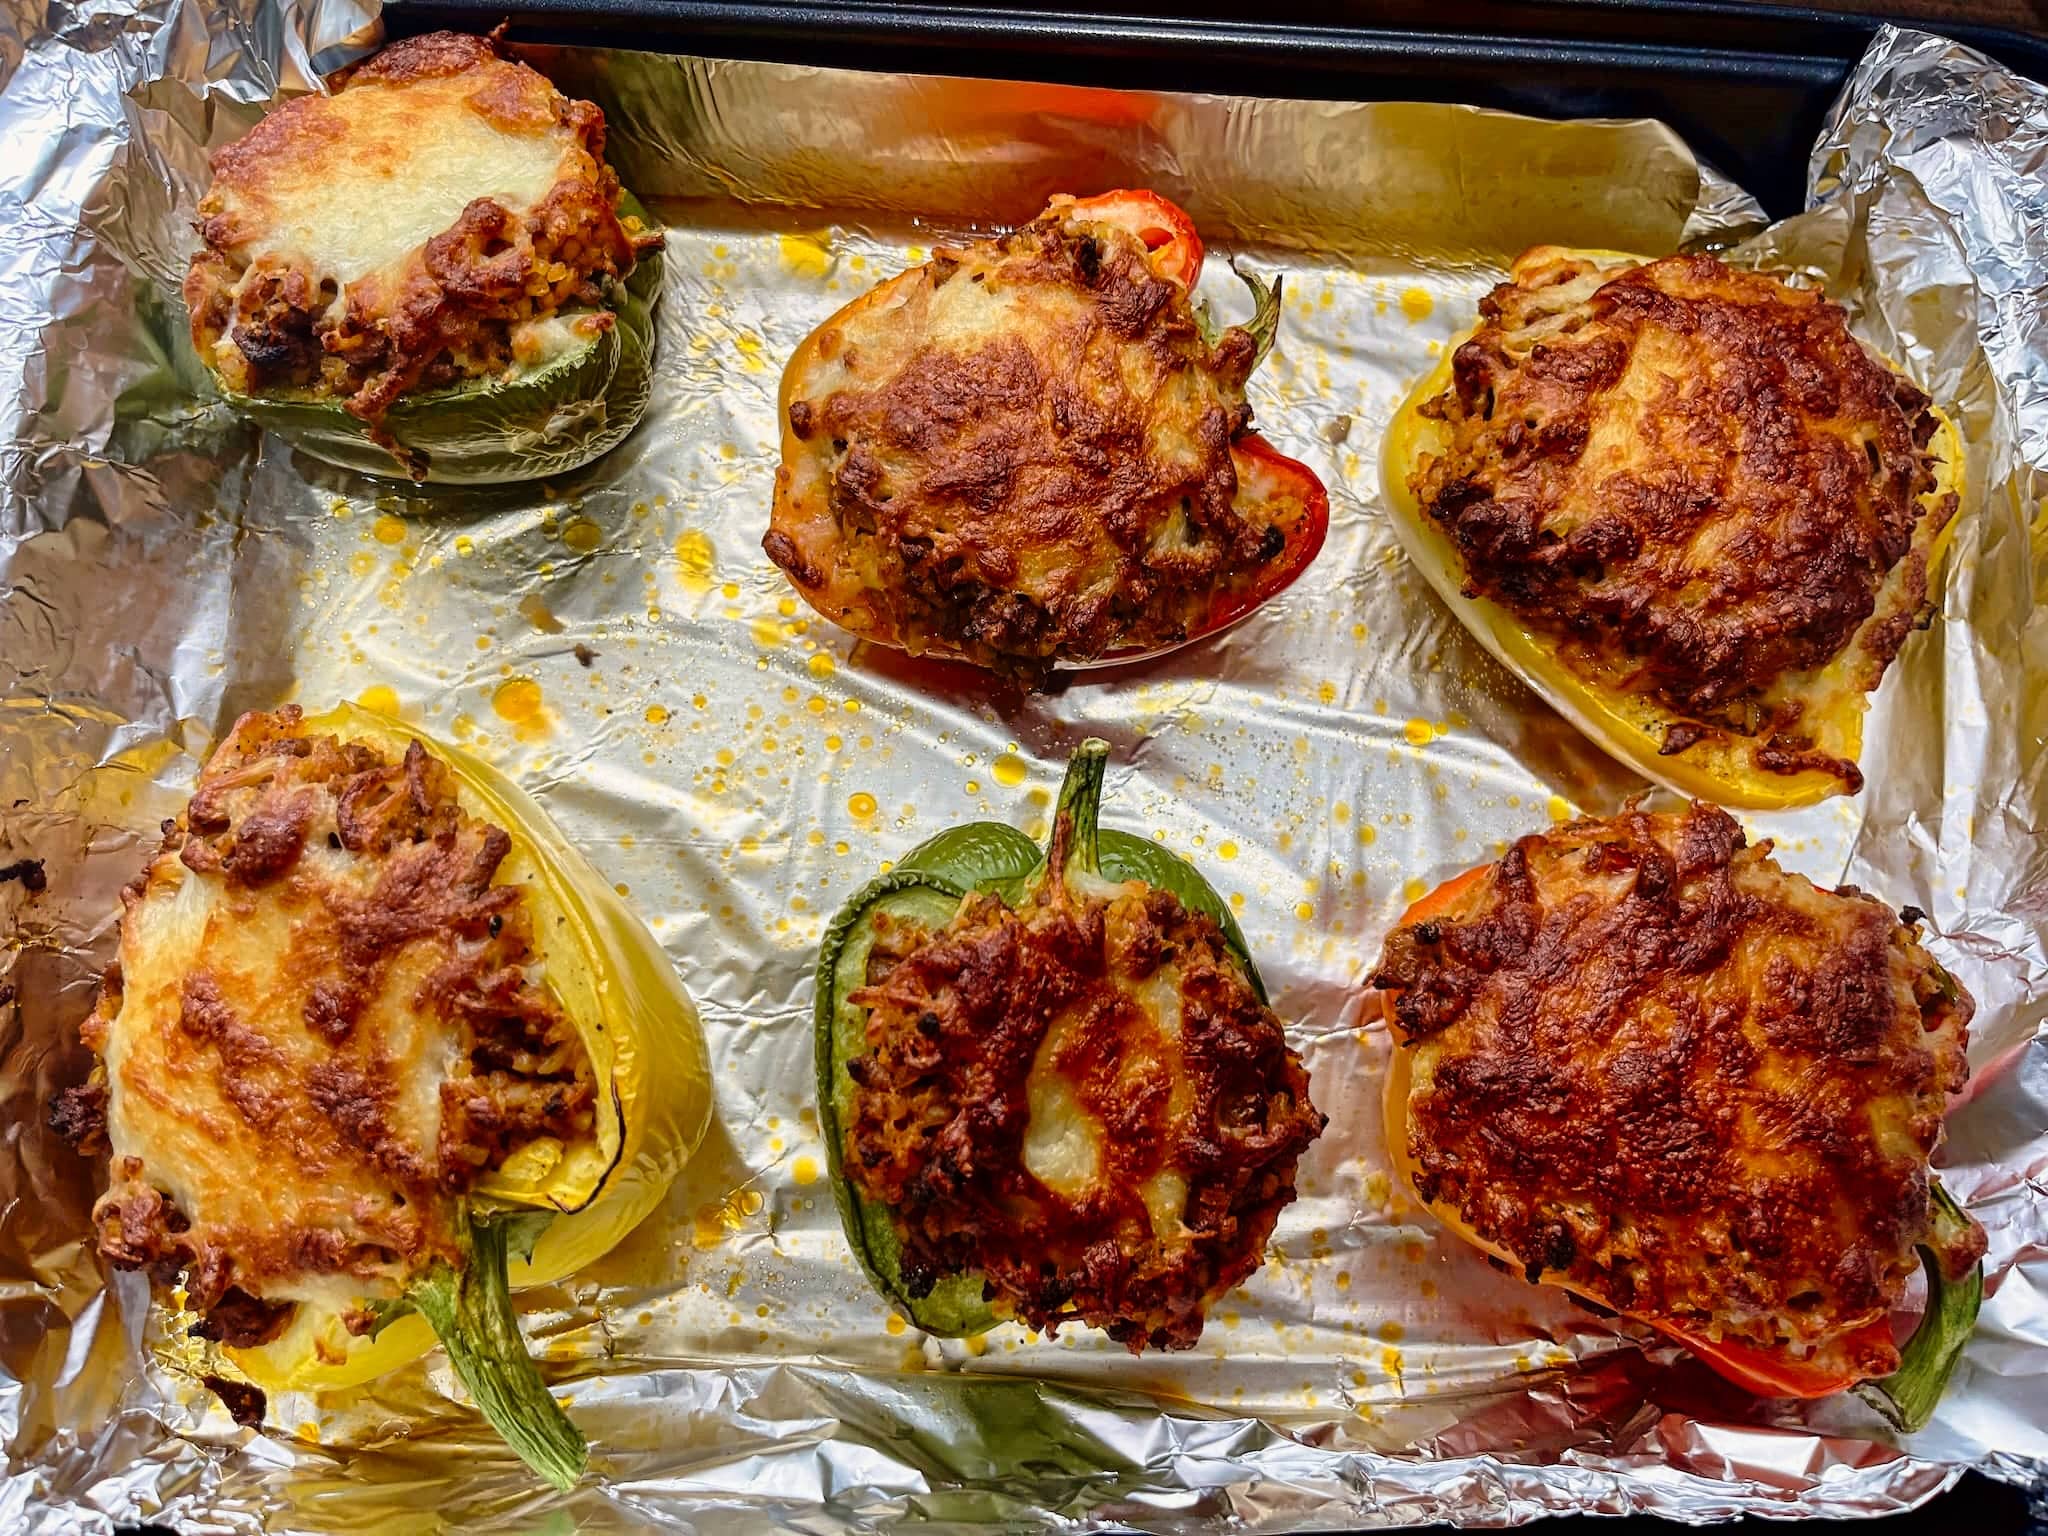 Nicely baked stuffed peppers right from the oven